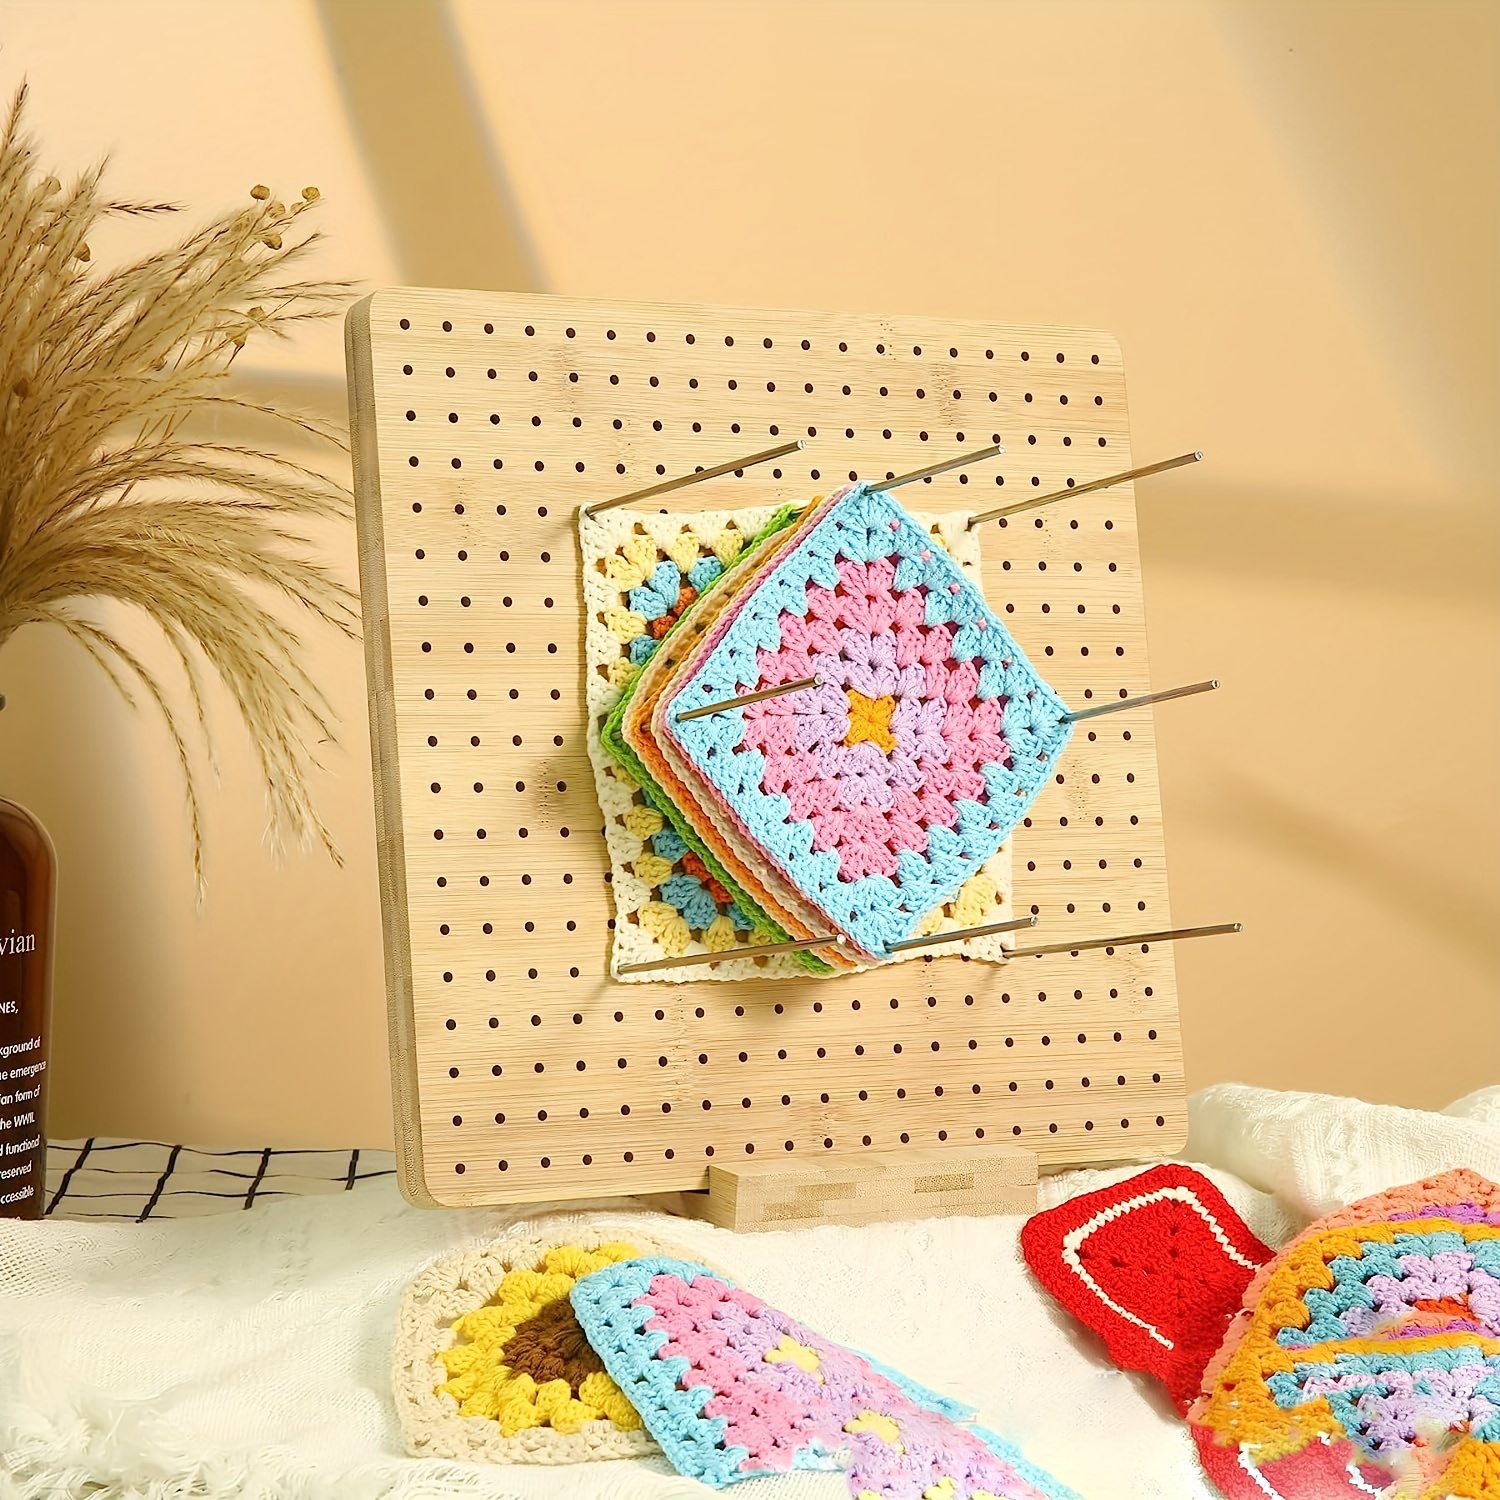 Wooden Crochet Blocking Project With 20 Iron Sticks And 1 - Temu